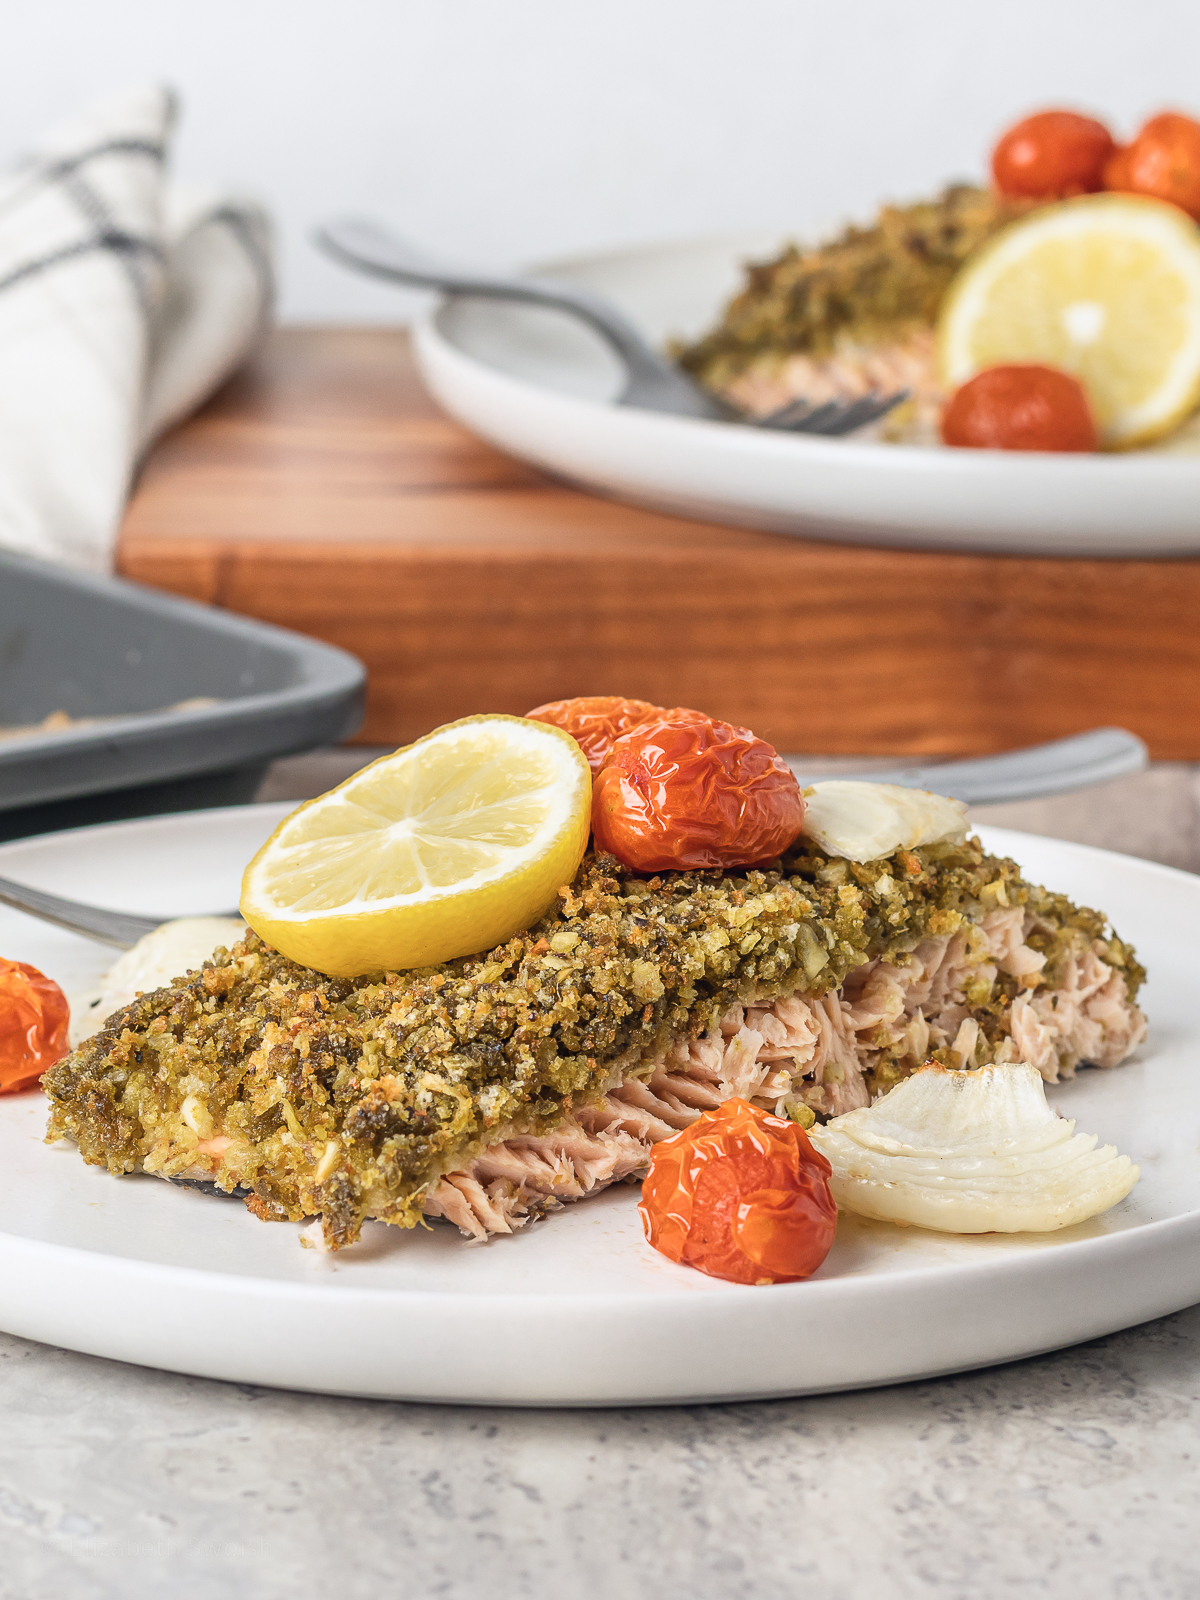 Two plates of Pesto Crusted Salmon with cherry tomatoes and onion. Garnished with lemon slices.